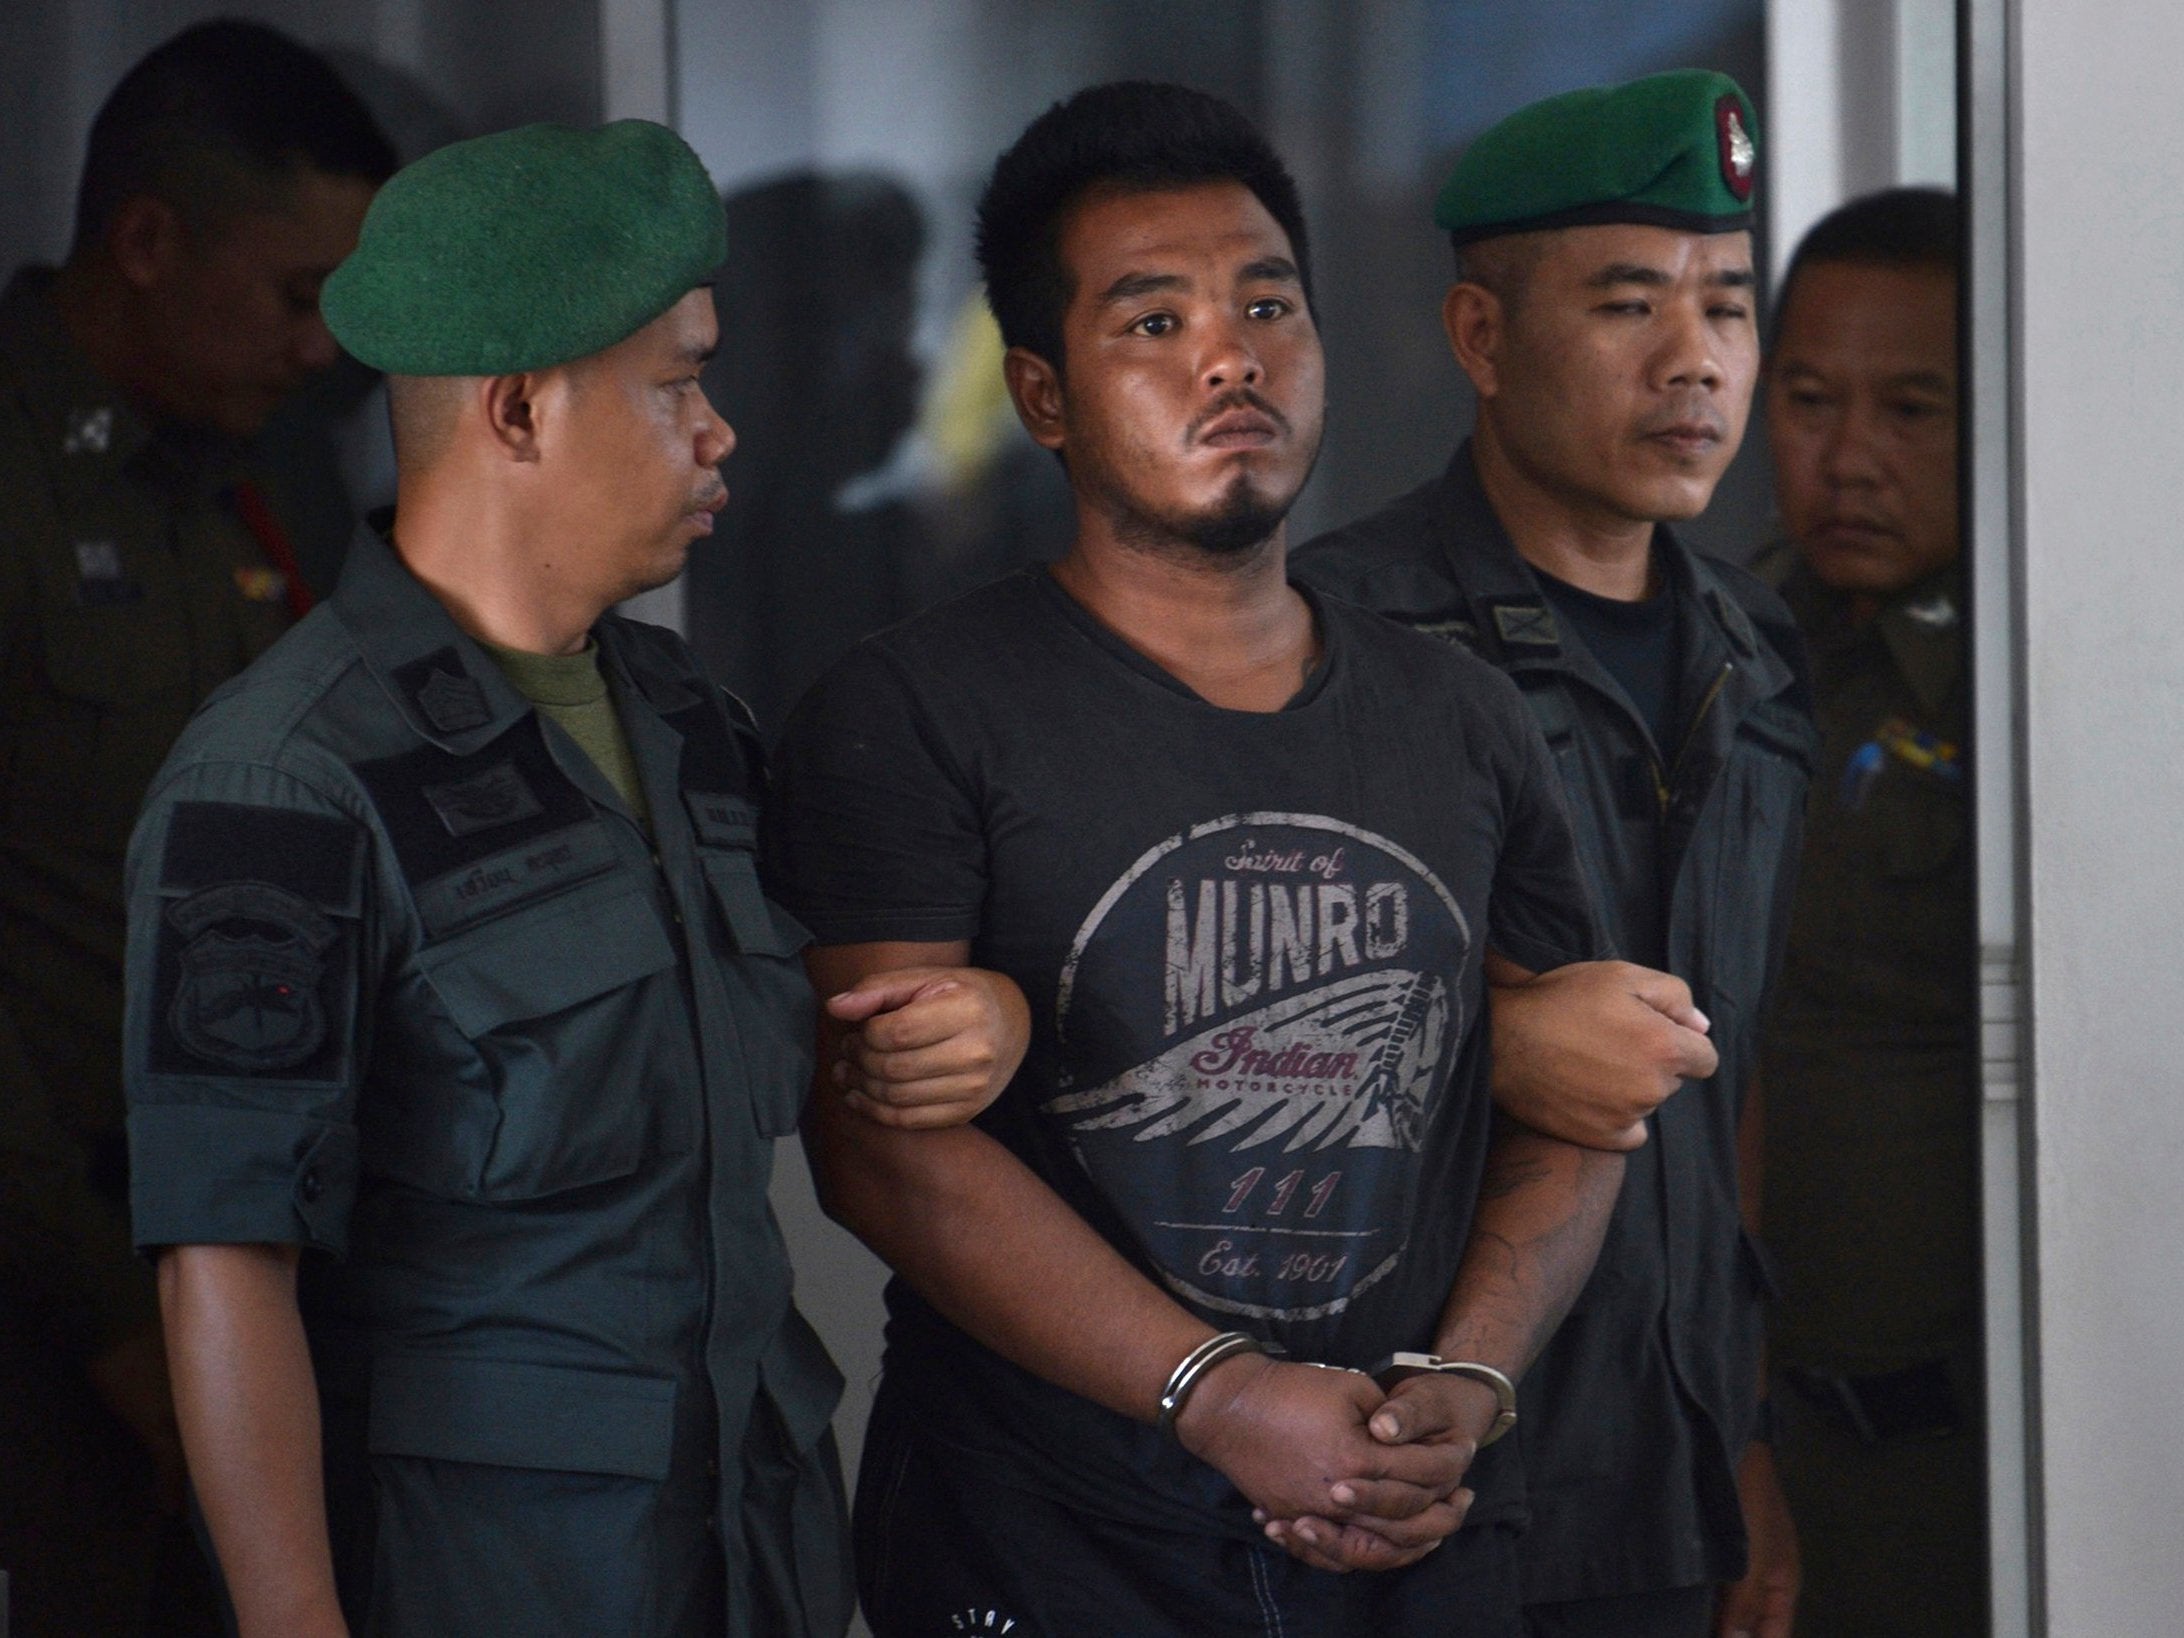 Thai suspect Ronnakorn Romruen, 23 years old, is escorted by police as he arrives at the Koh Si Chang police station in Chonburi province, Thailand